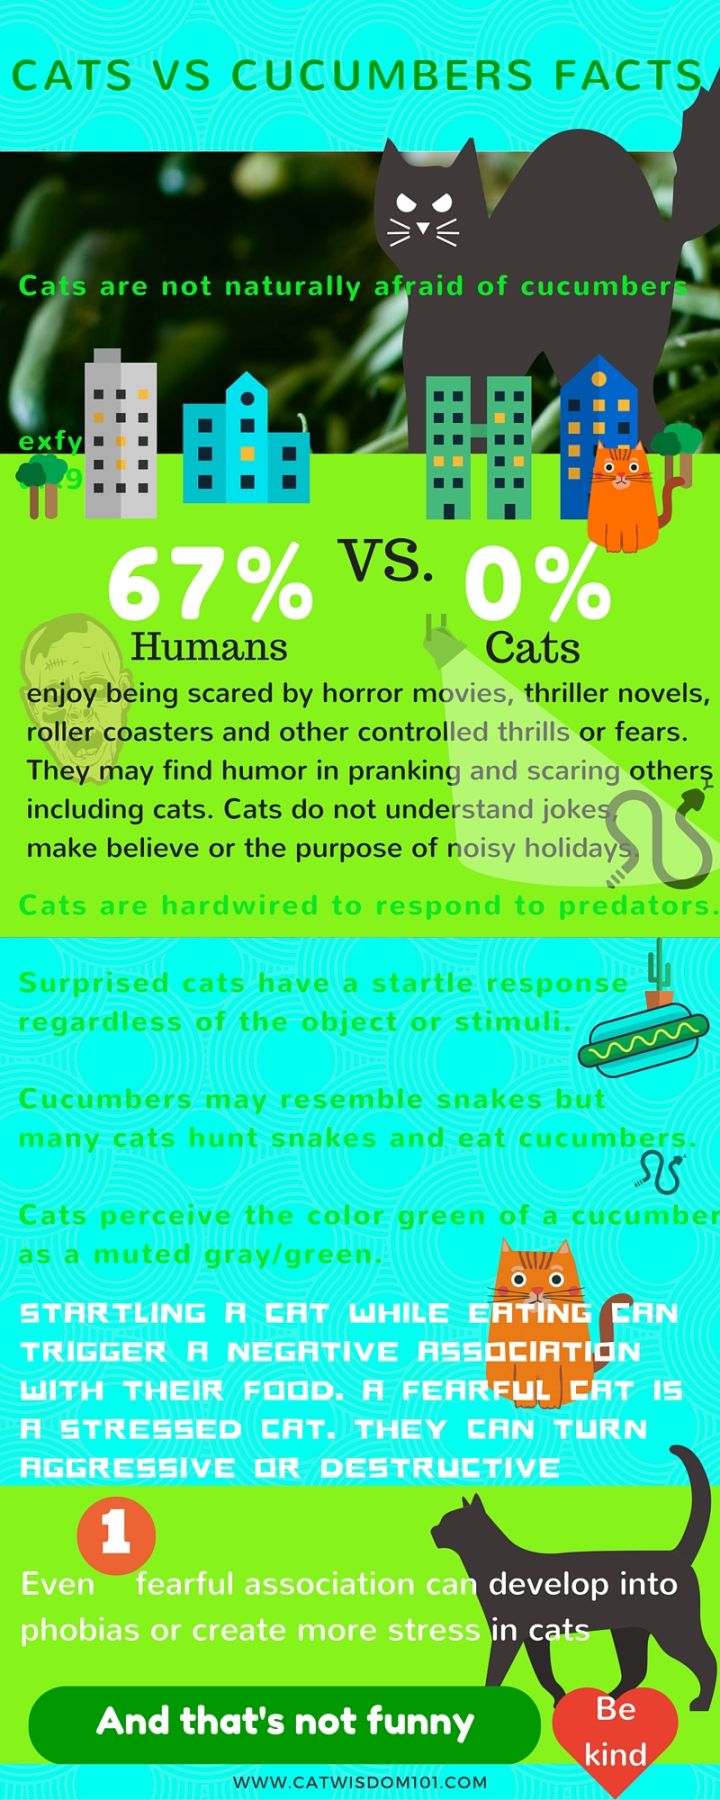 Cats VS Cucumber Facts infographic